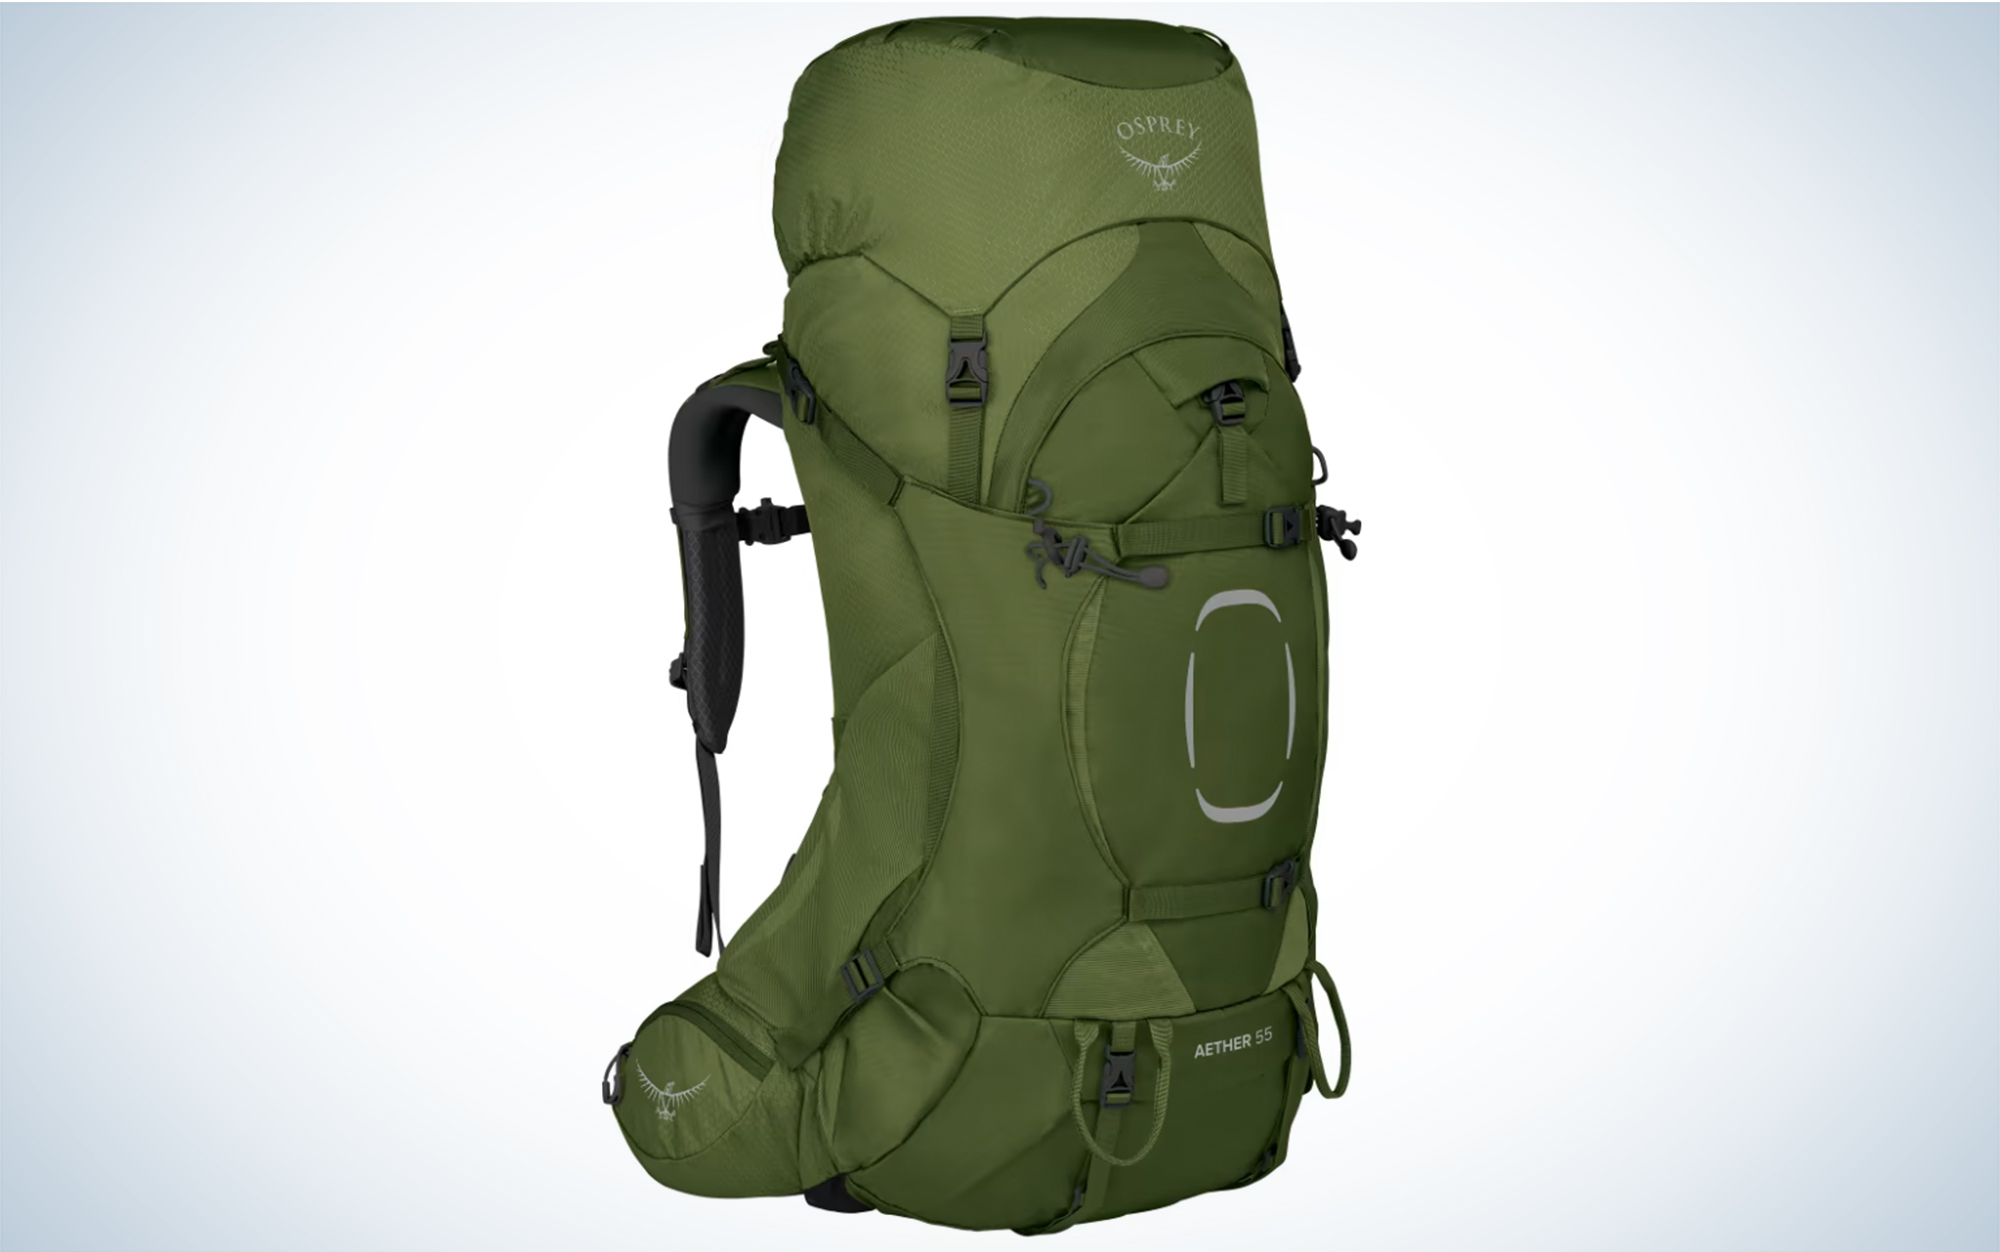 The Osprey backpack is on sale.